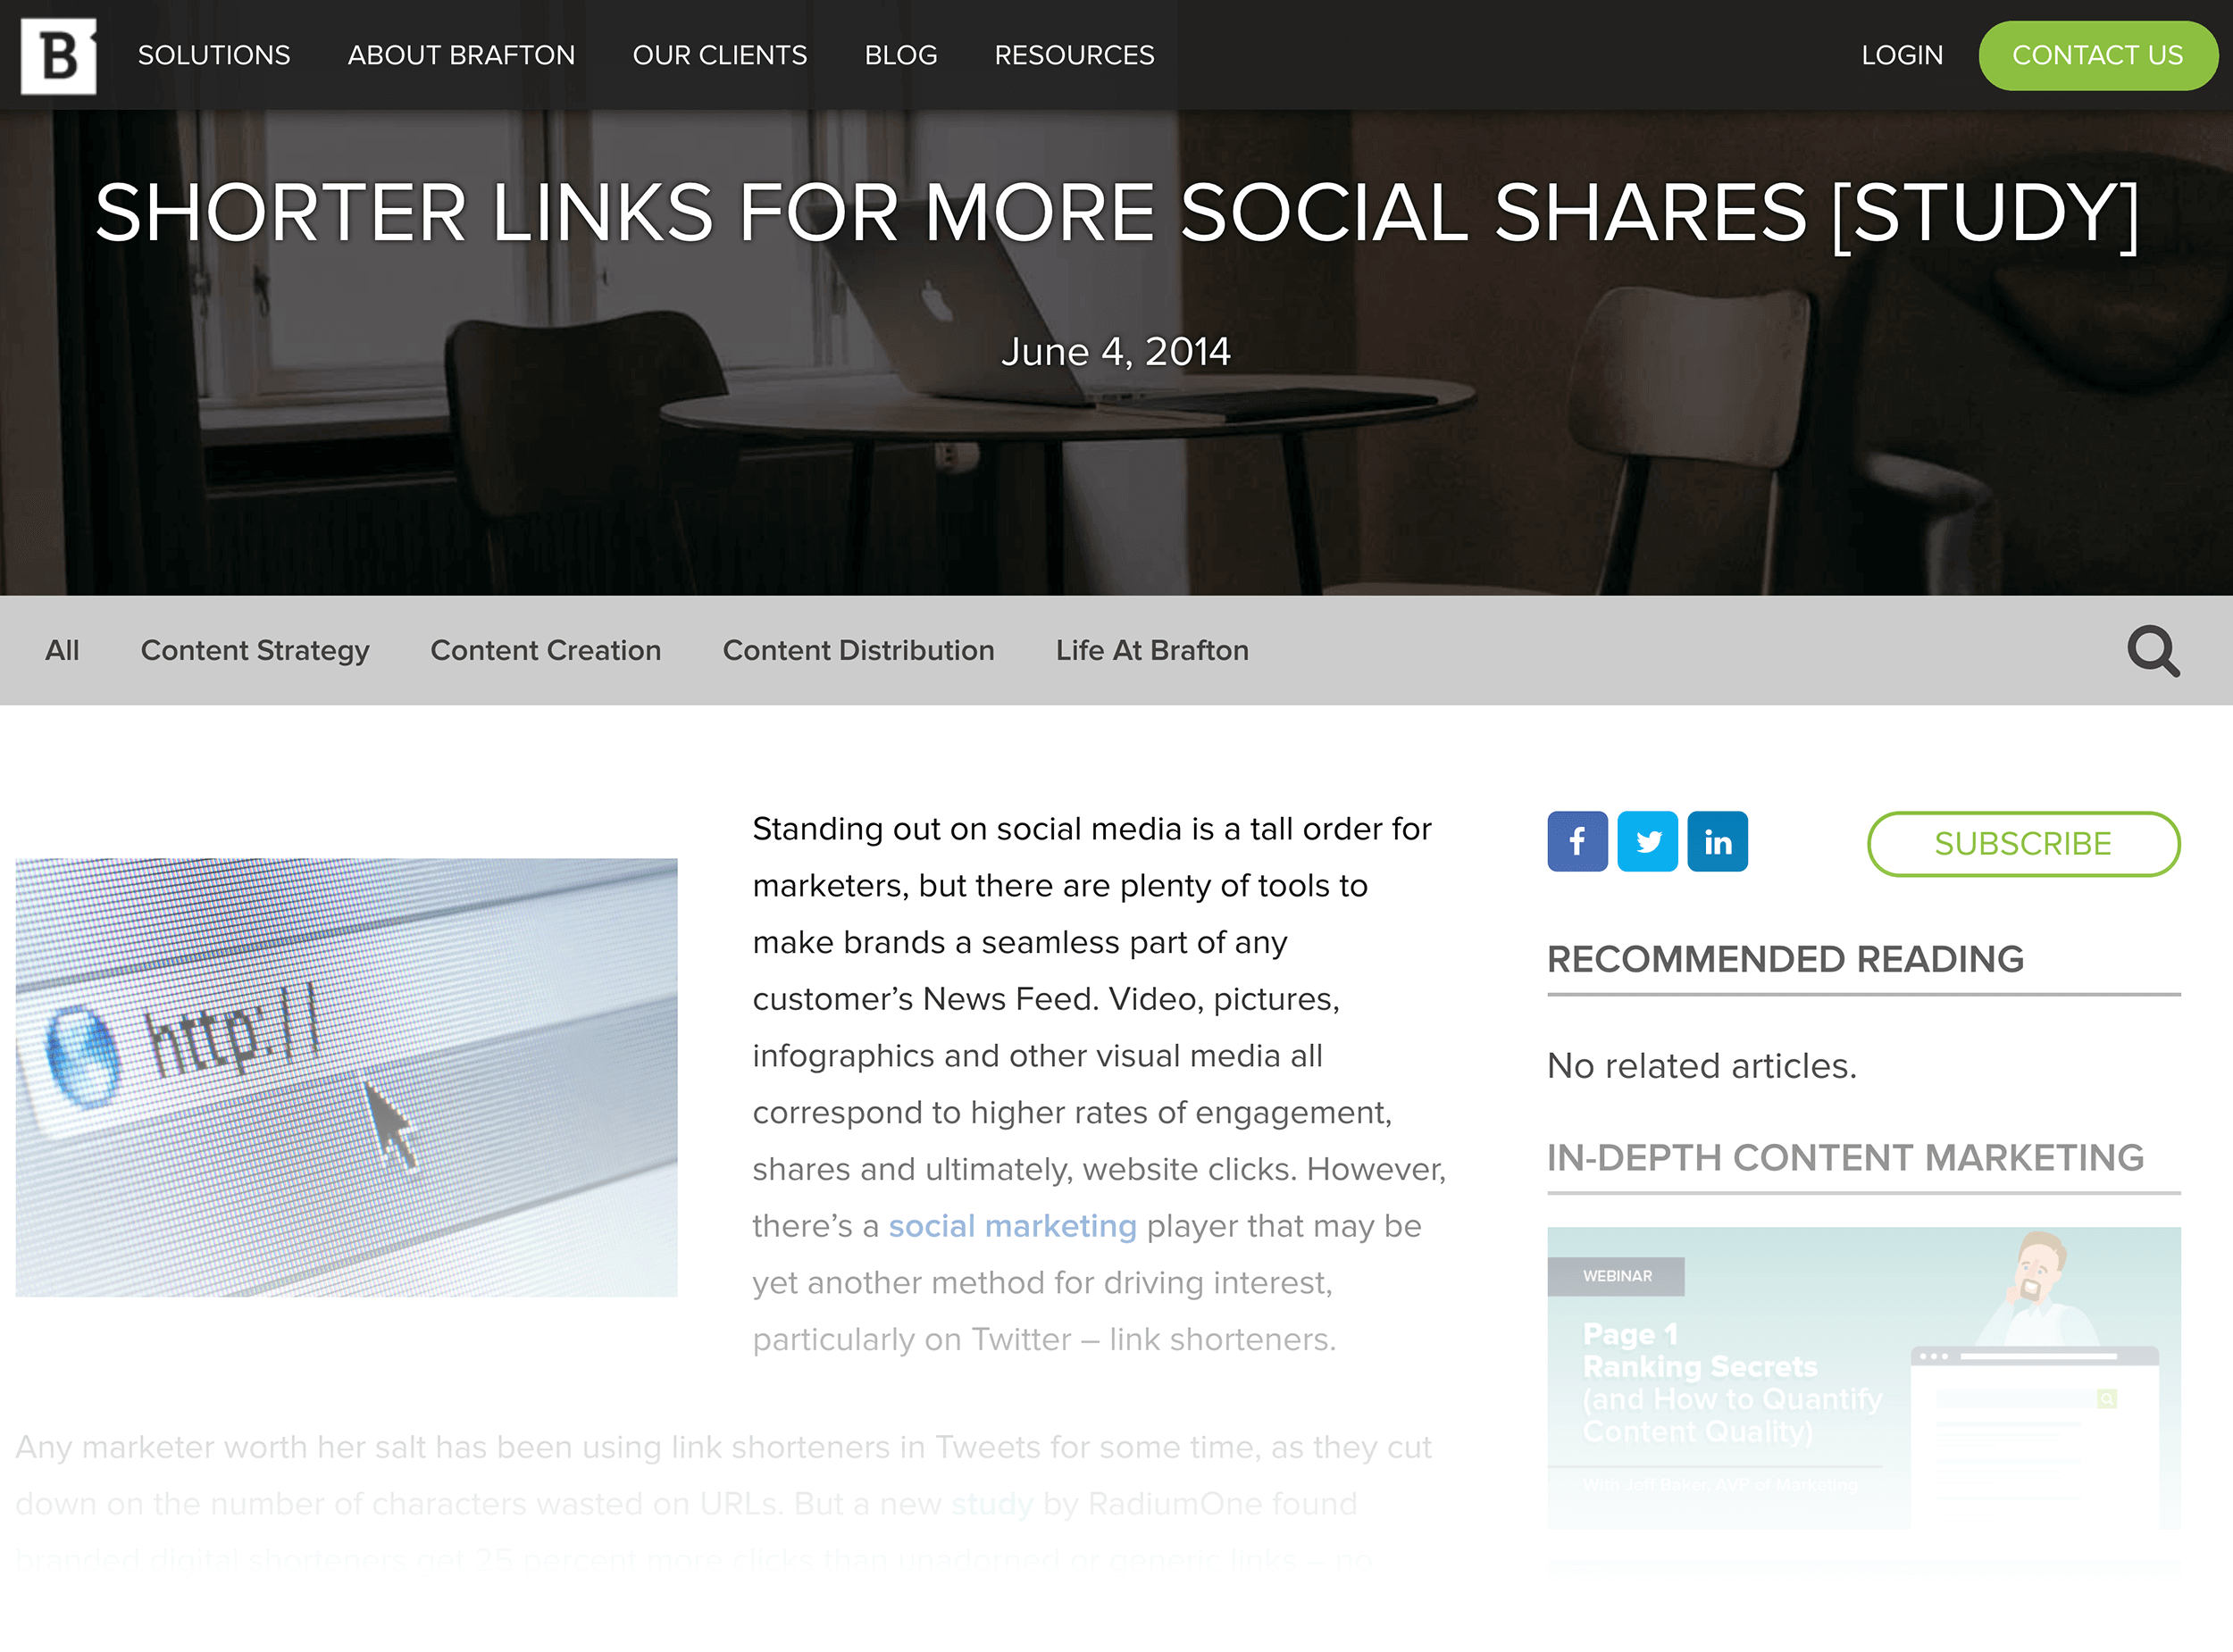 Short URLs are correlated with more social shares